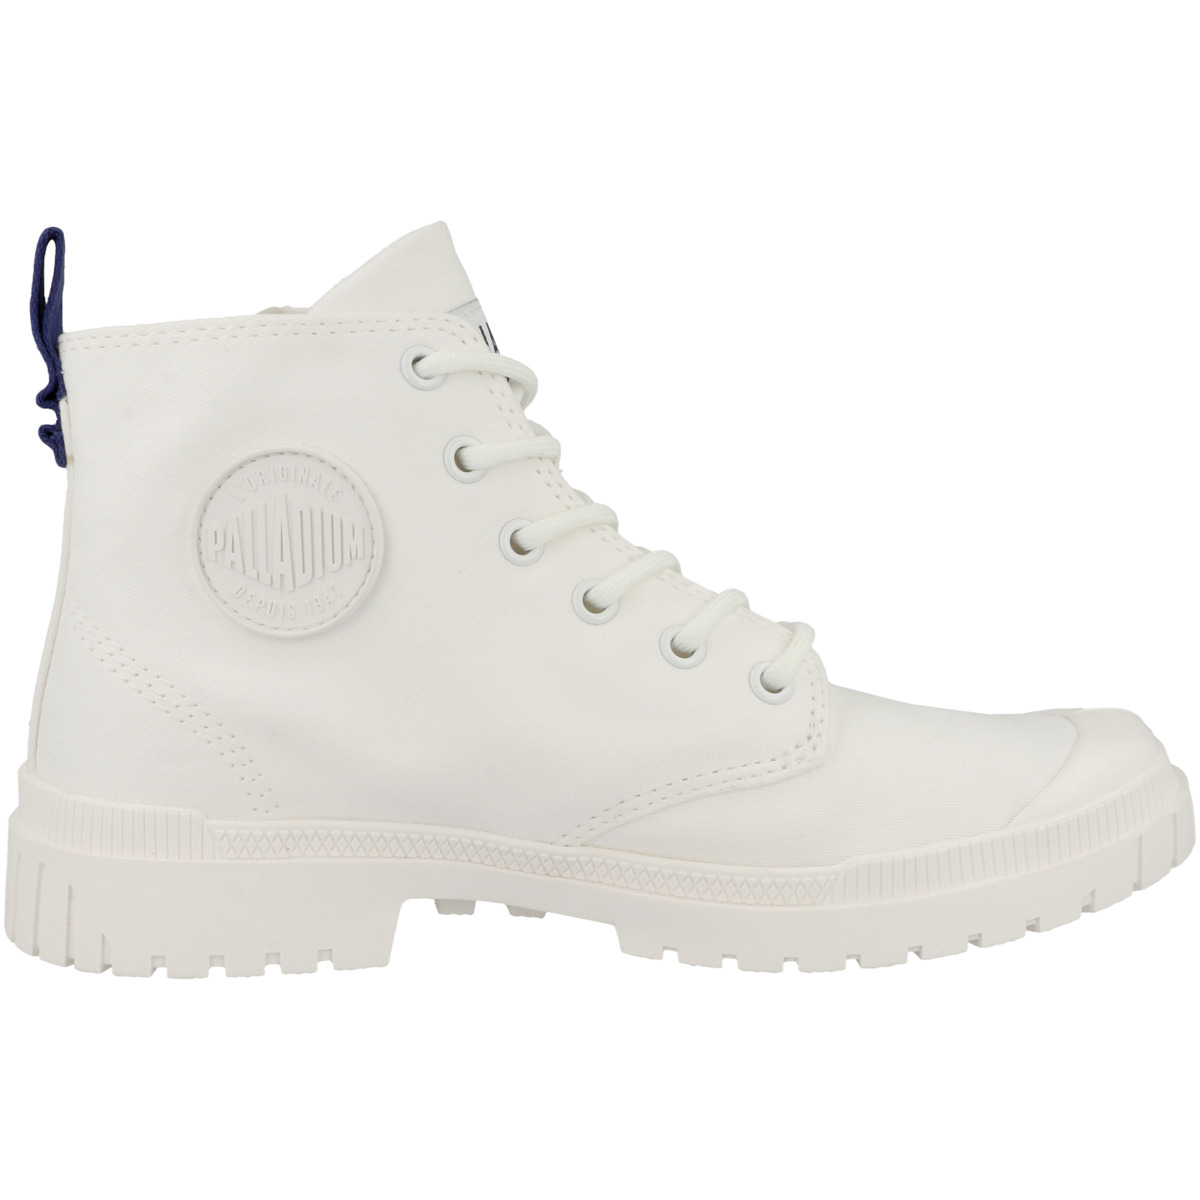 Palladium Sp20 French Outzip Boots weiss